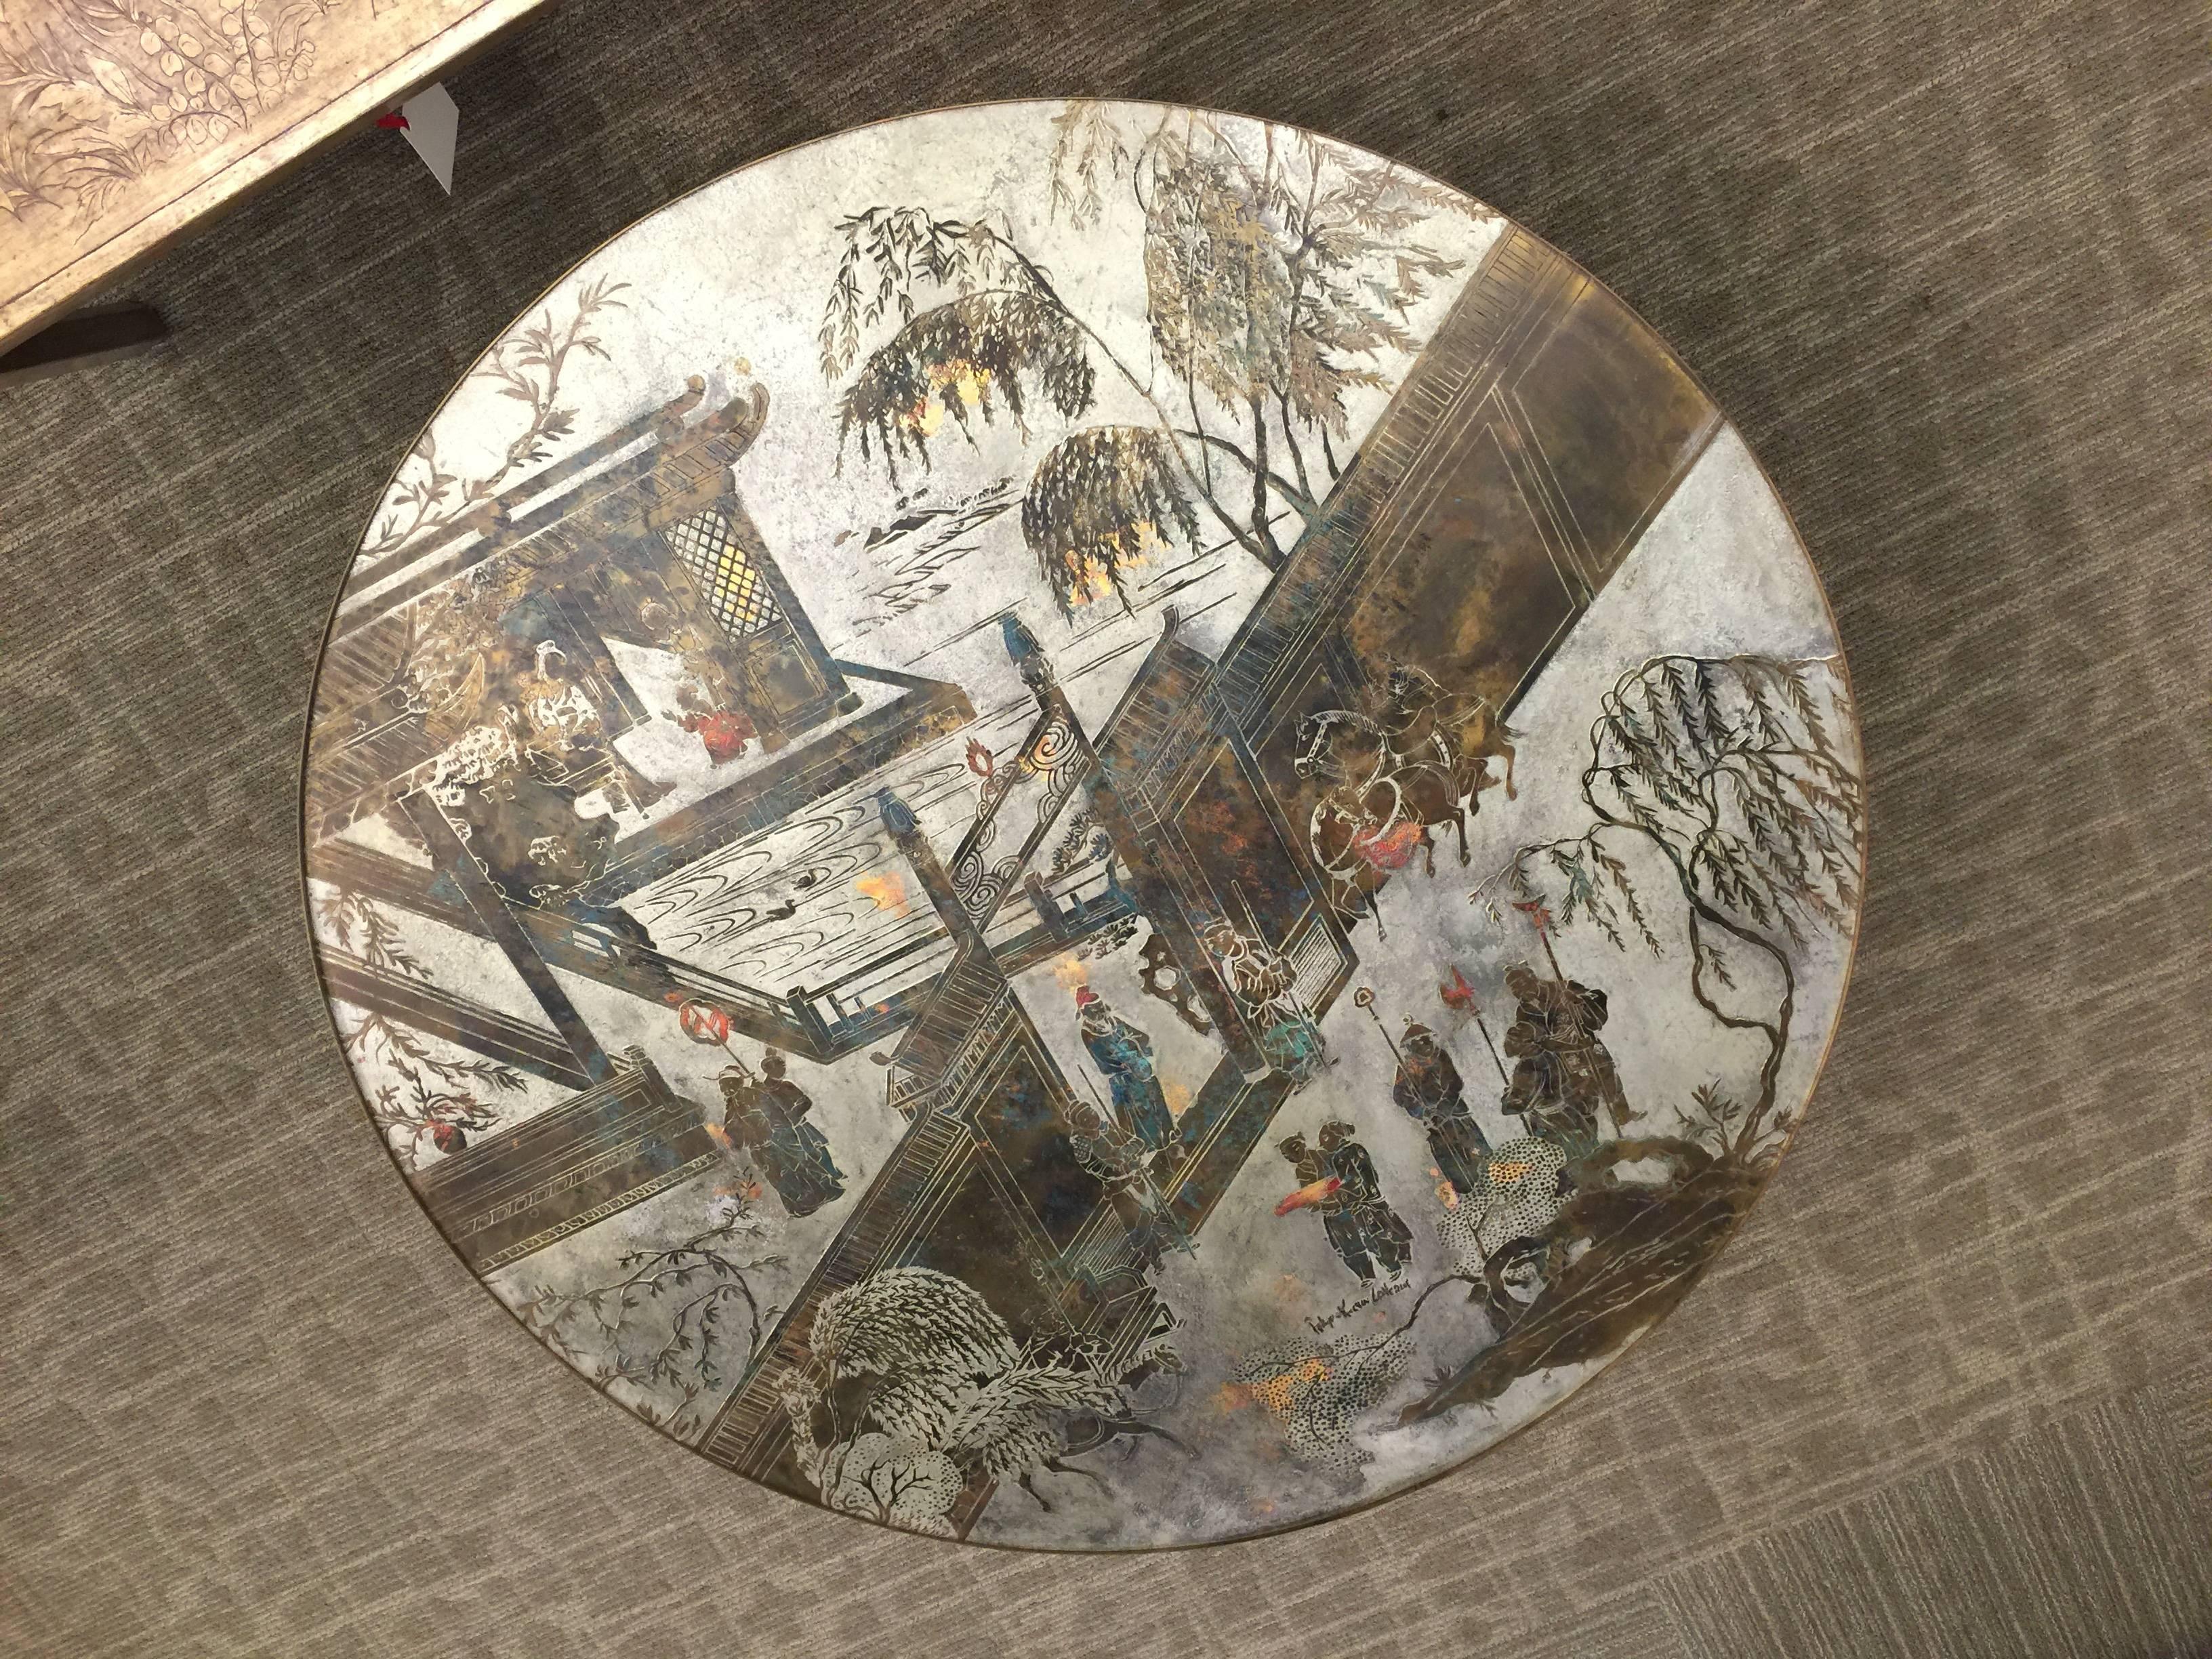 A wonderful round table by Philip and Kelvin LaVerne, with pedestal base.

This table is in fantastic condition and has very nice coloration and patina.

This table is from the Chan series and features Oriental figures in a landscape.

Signed